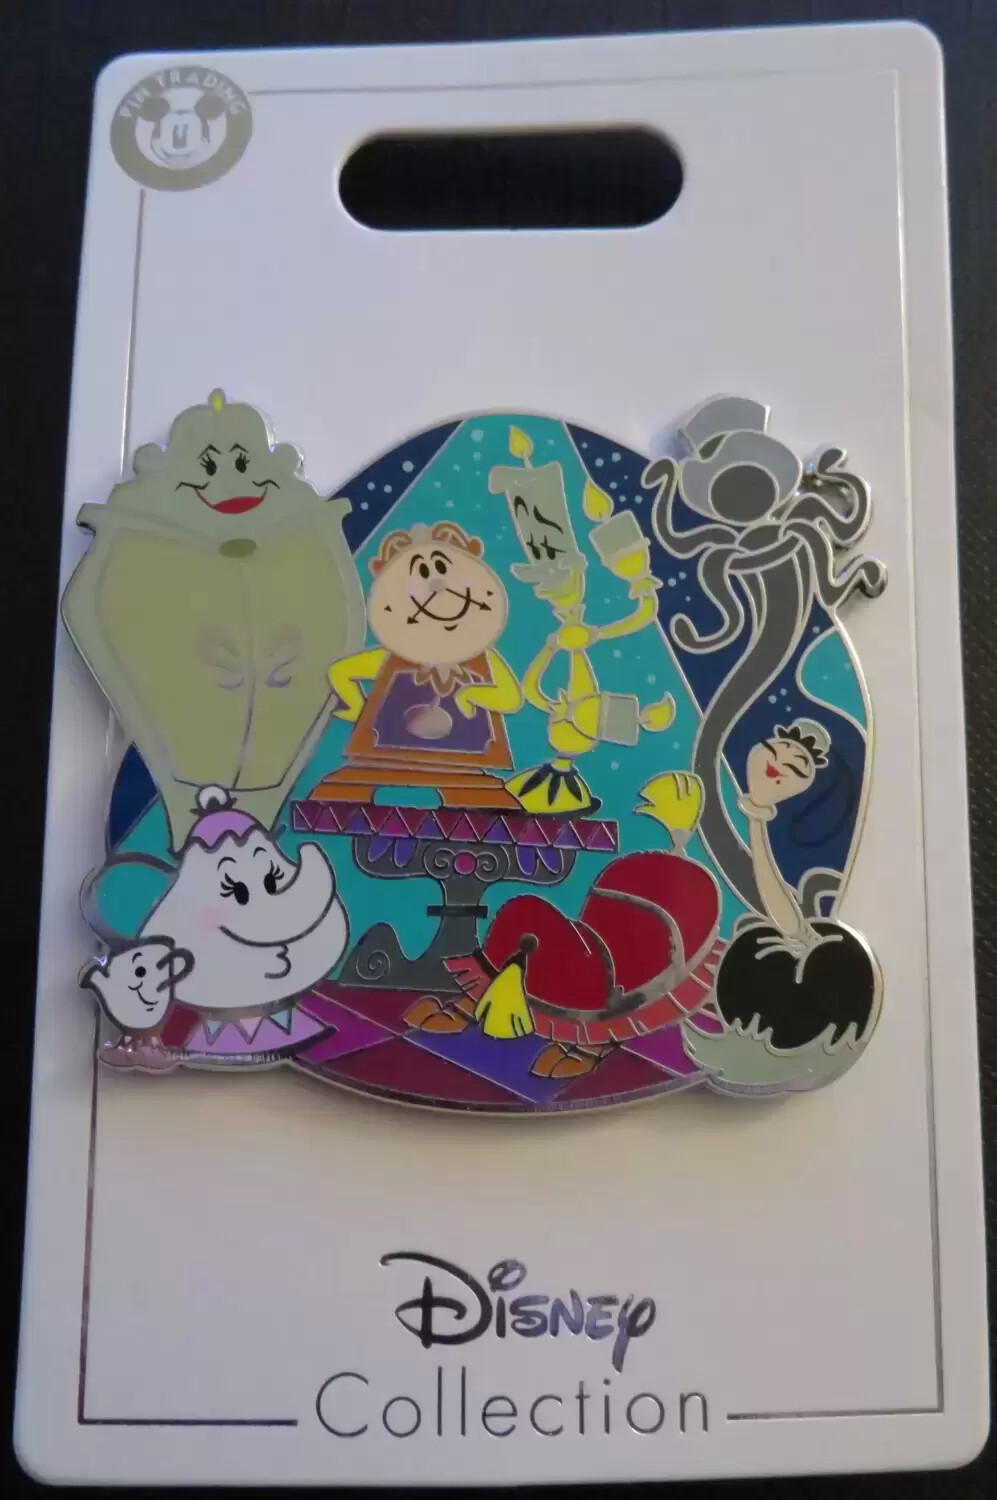 Disney - Pins Open Edition - Beauty and the Beast characters